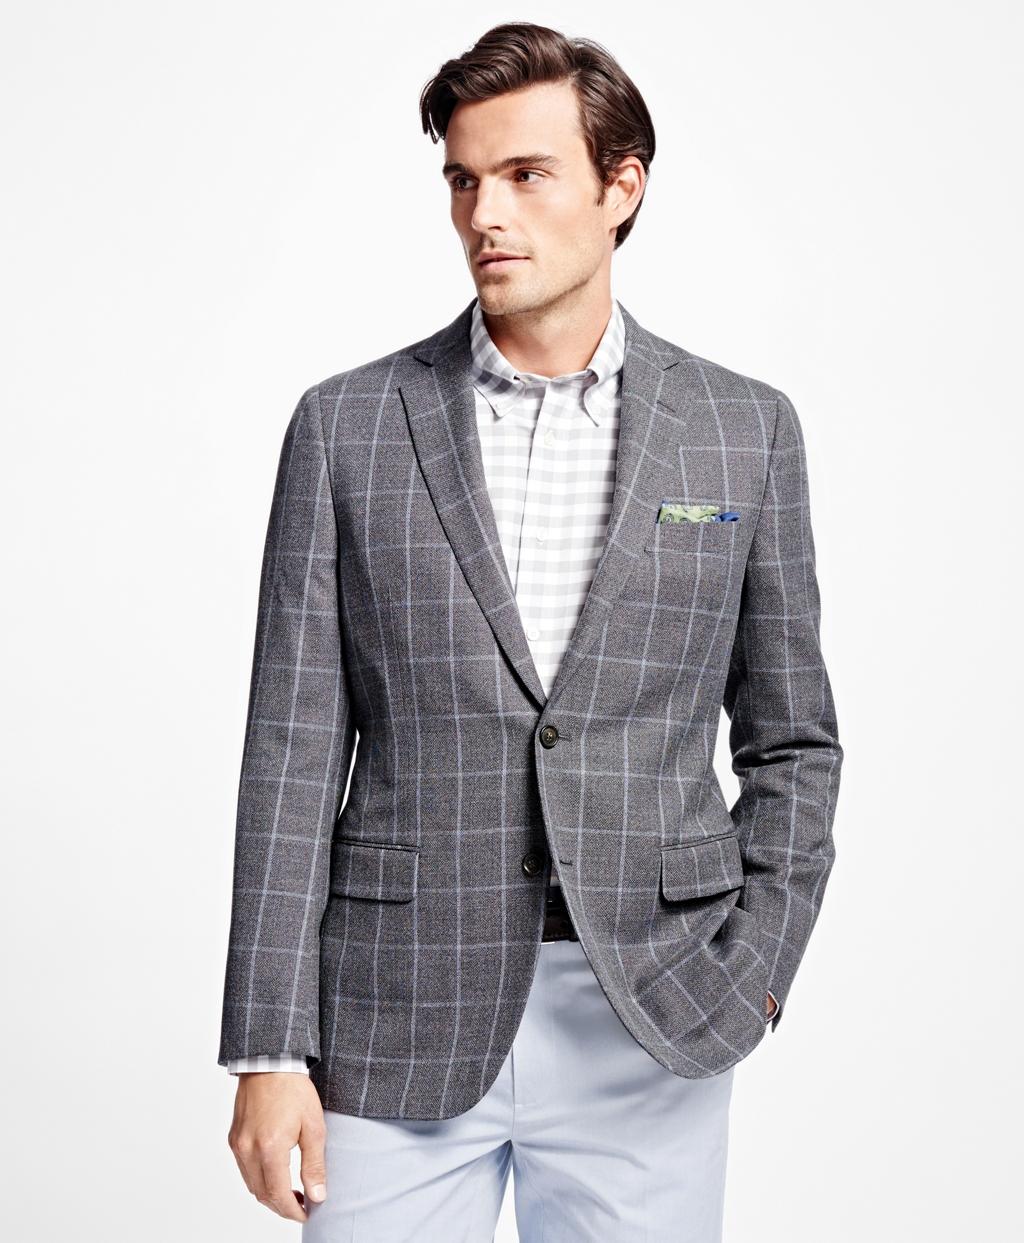 Lyst - Brooks Brothers Fitzgerald Fit Windowpane Sport Coat in Gray for Men